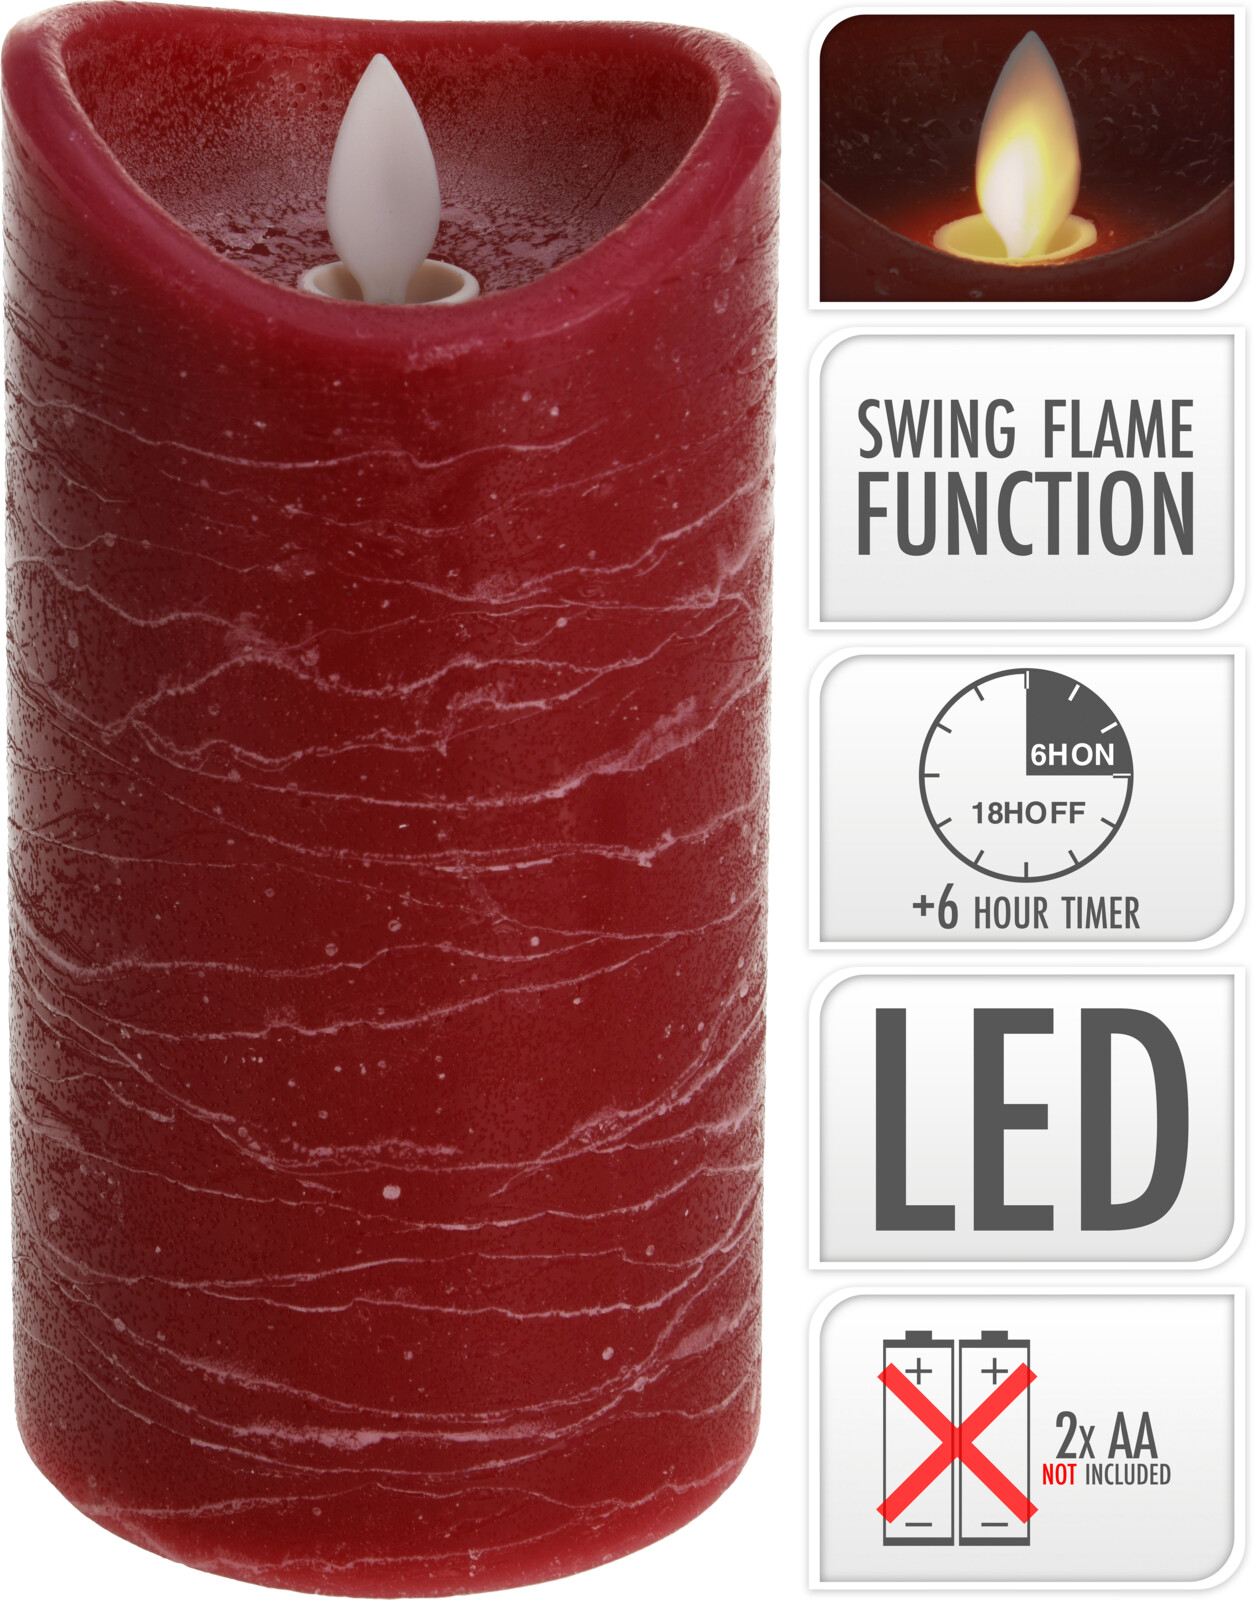 LED CAND.SWING FLAME 75X1